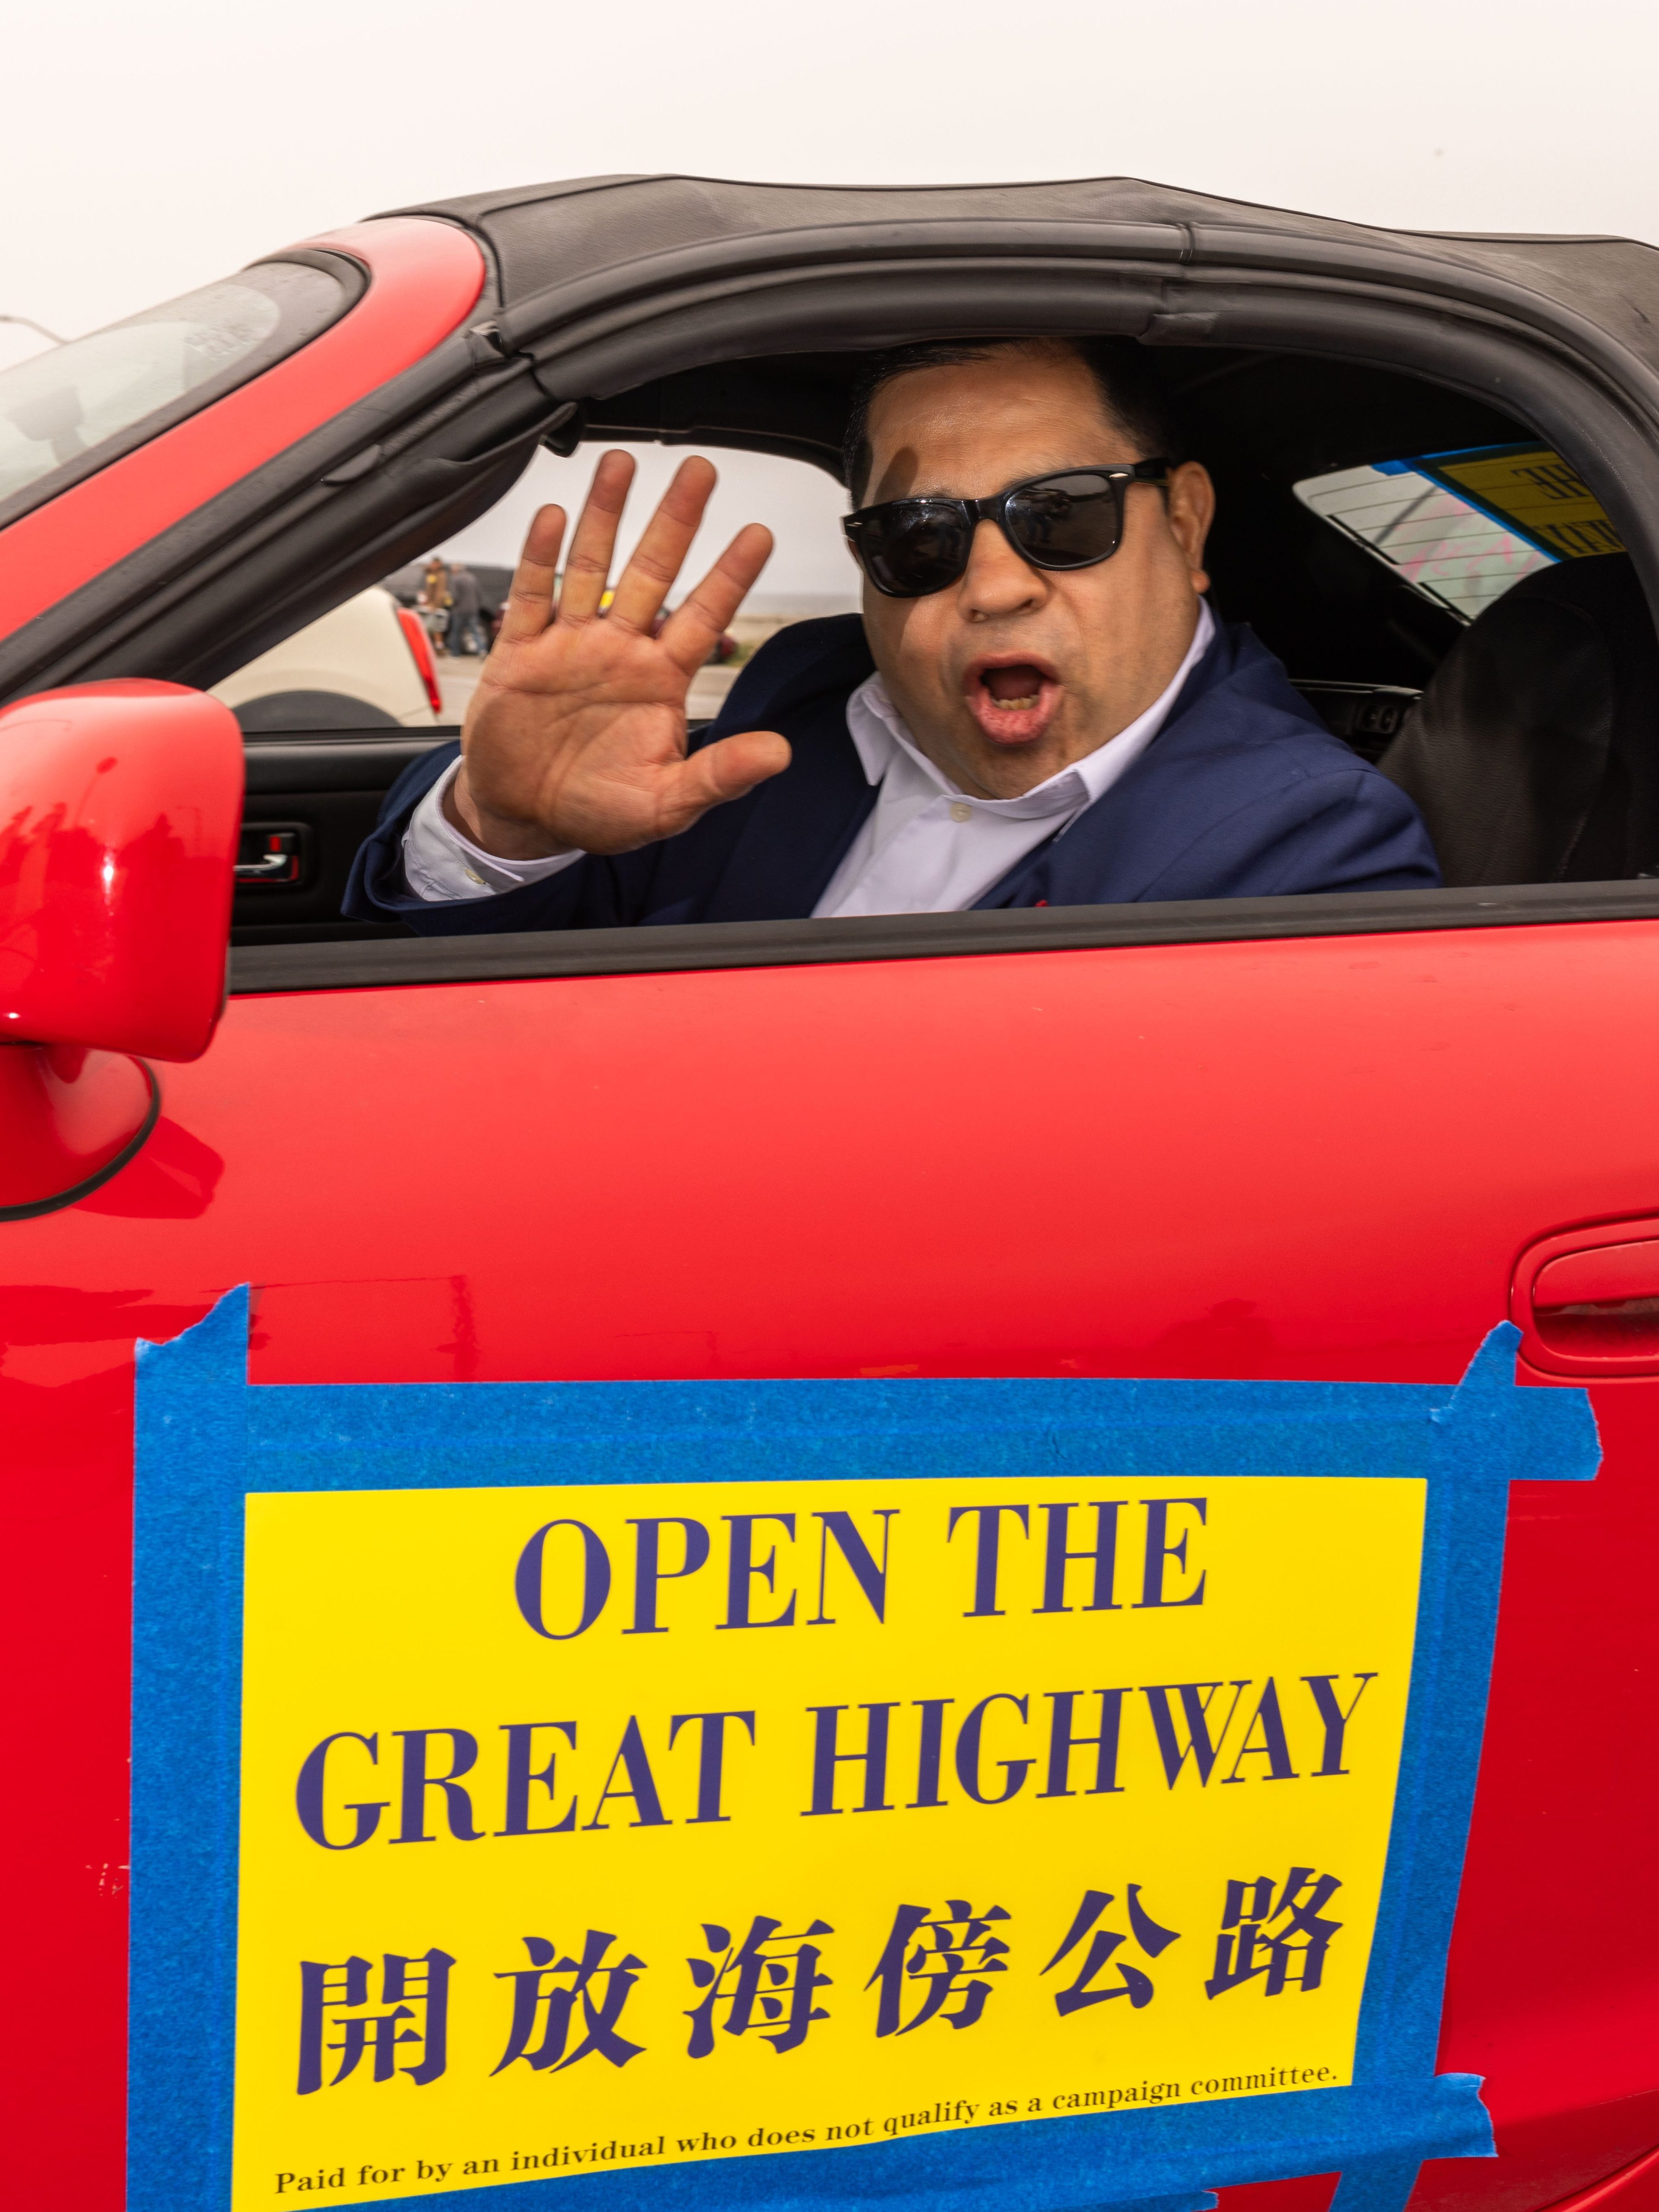 A man in sunglasses and a suit waves and speaks from a red convertible with a sign reading "OPEN THE GREAT HIGHWAY" in English and Chinese taped to the door.